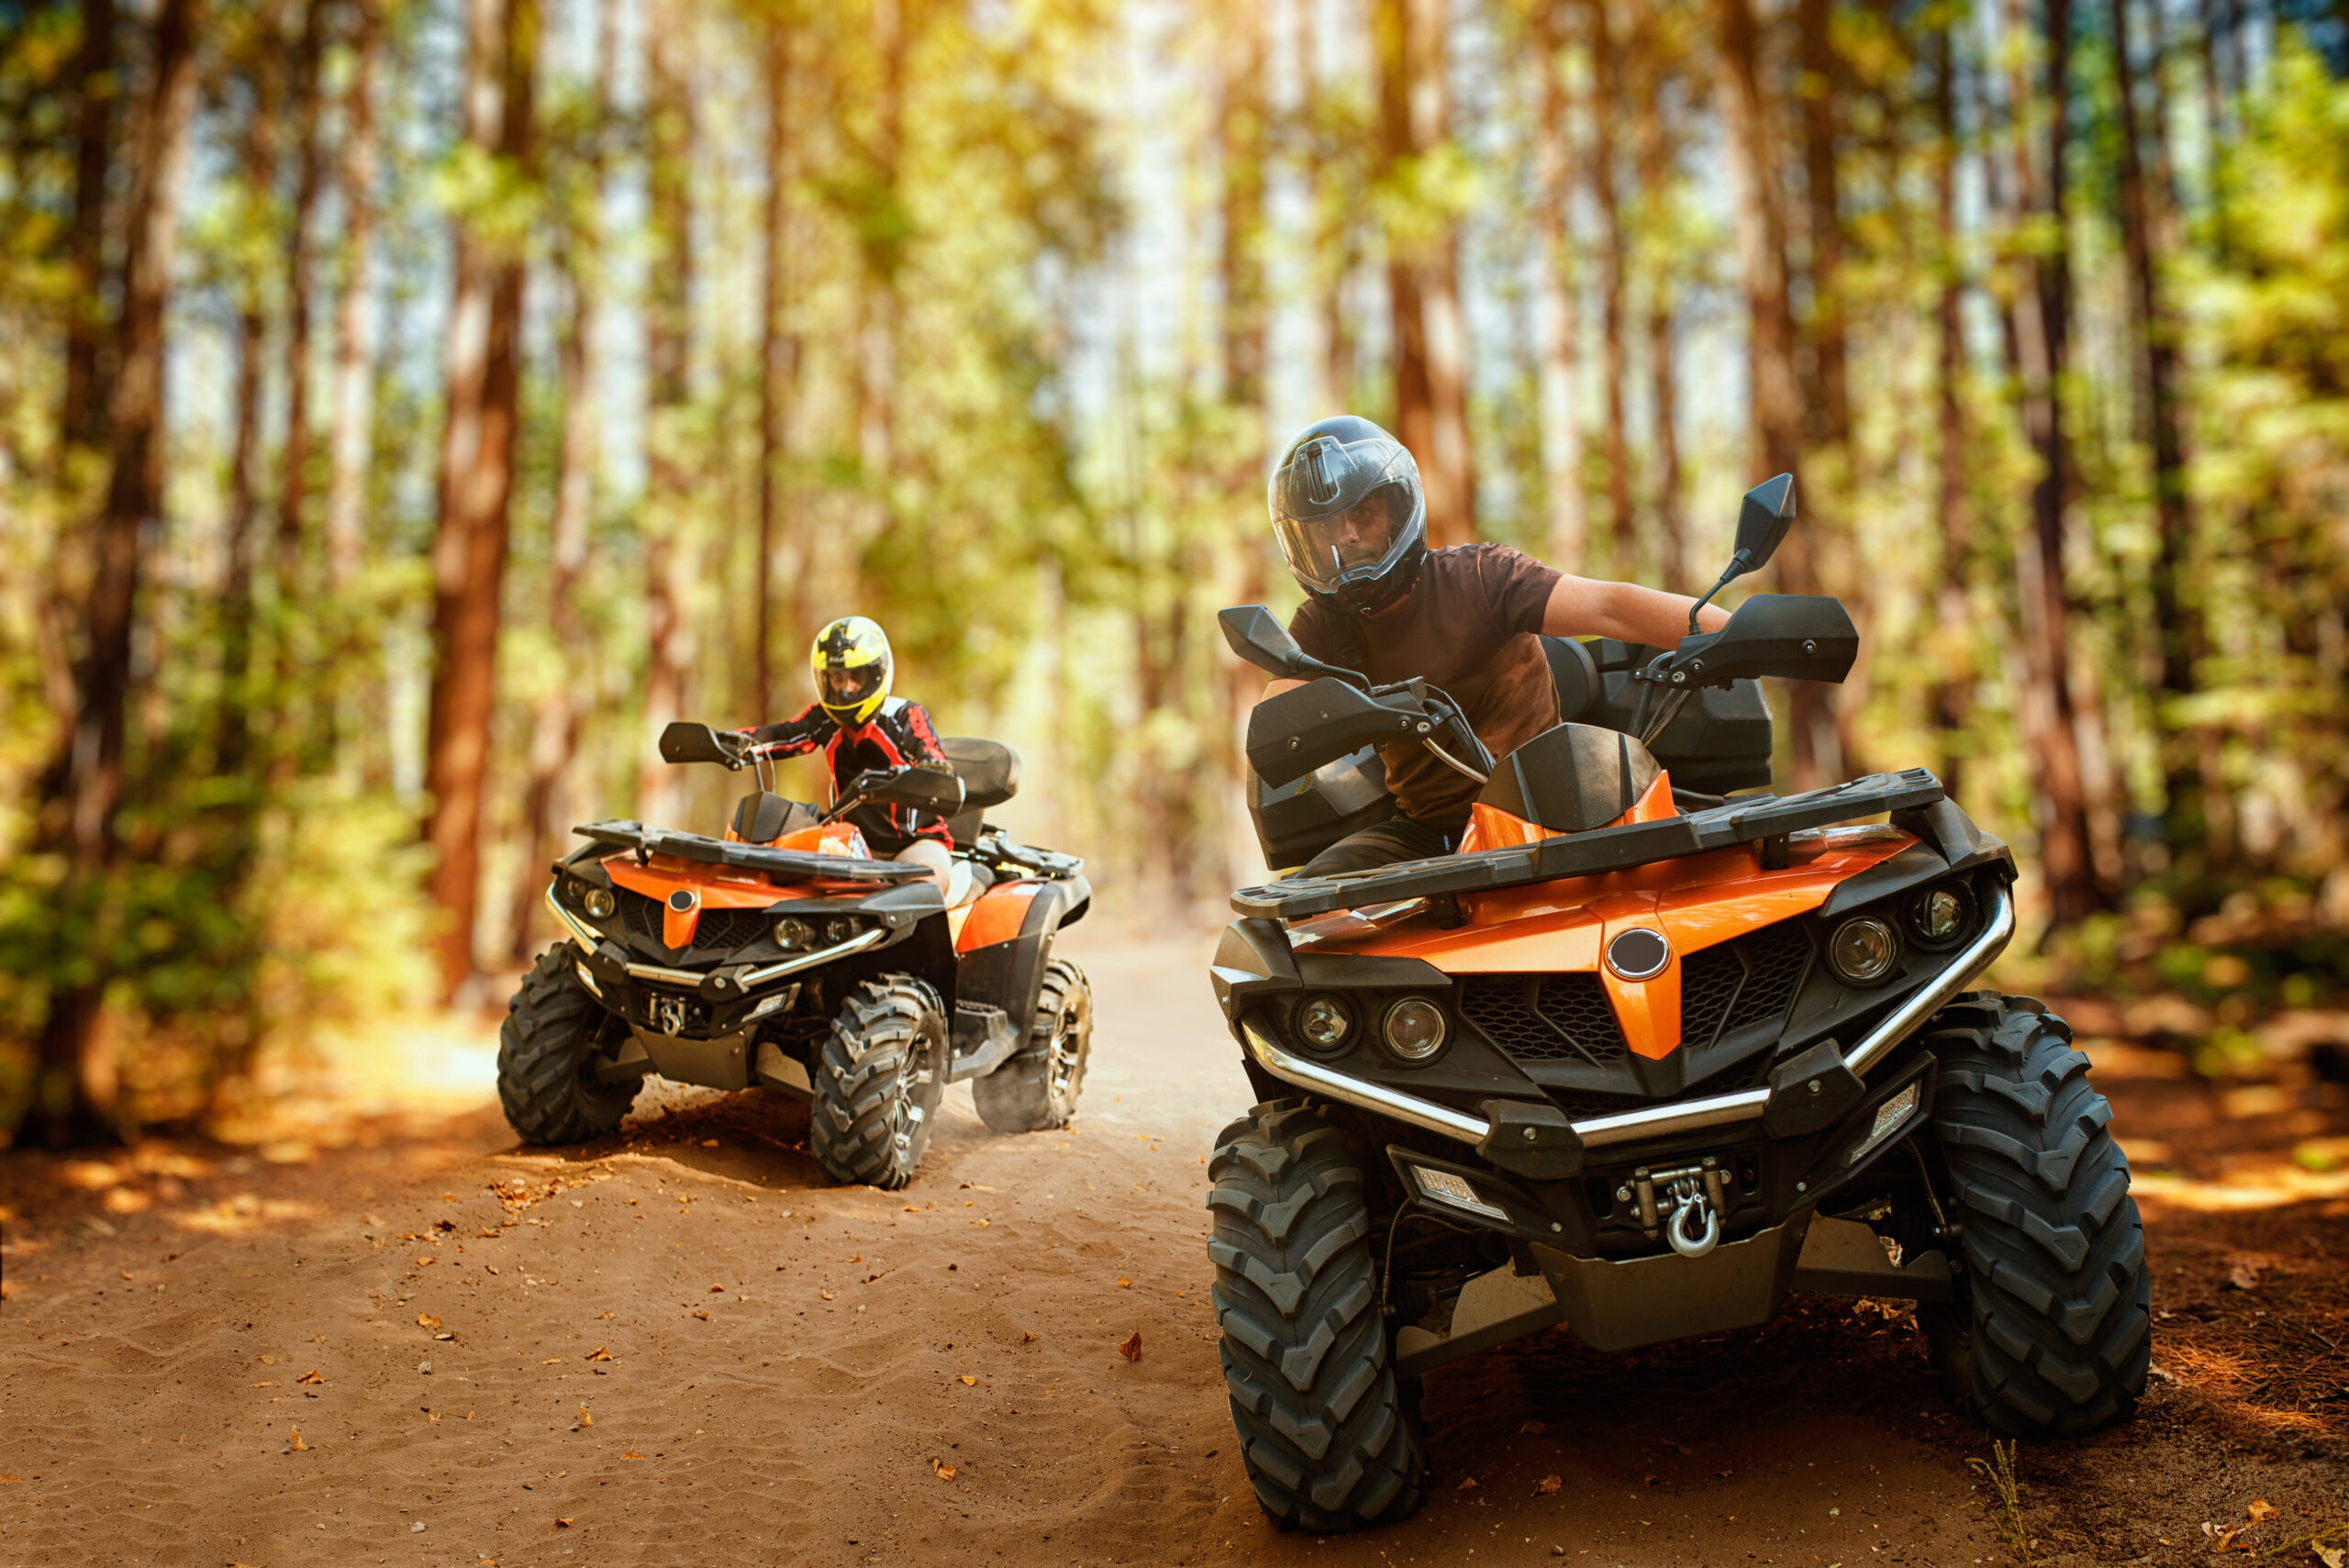 Thanks to a new ATV loan, two riders go exploring along a  Tennessee forest trail.